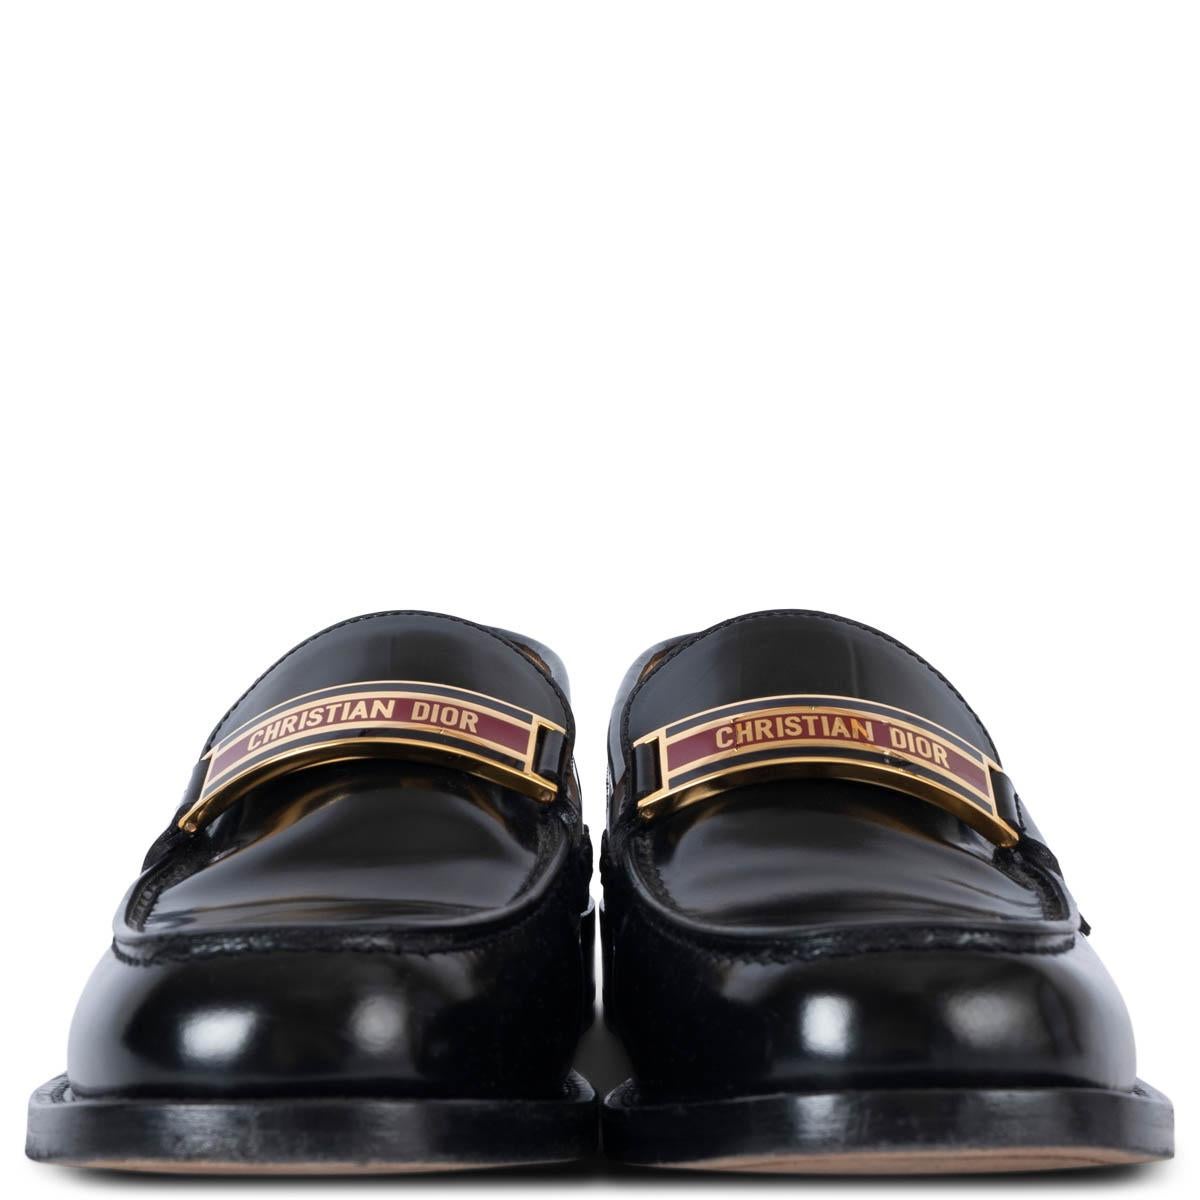 100% authentic Christian Dior Code classic loafers in black shiny leather with gold-tone, burgundy and black logo plate. Have been worn and are in excellent condition. 

Measurements
Imprinted Size	38 (fit big)
Shoe Size	38.5
Inside Sole	25cm